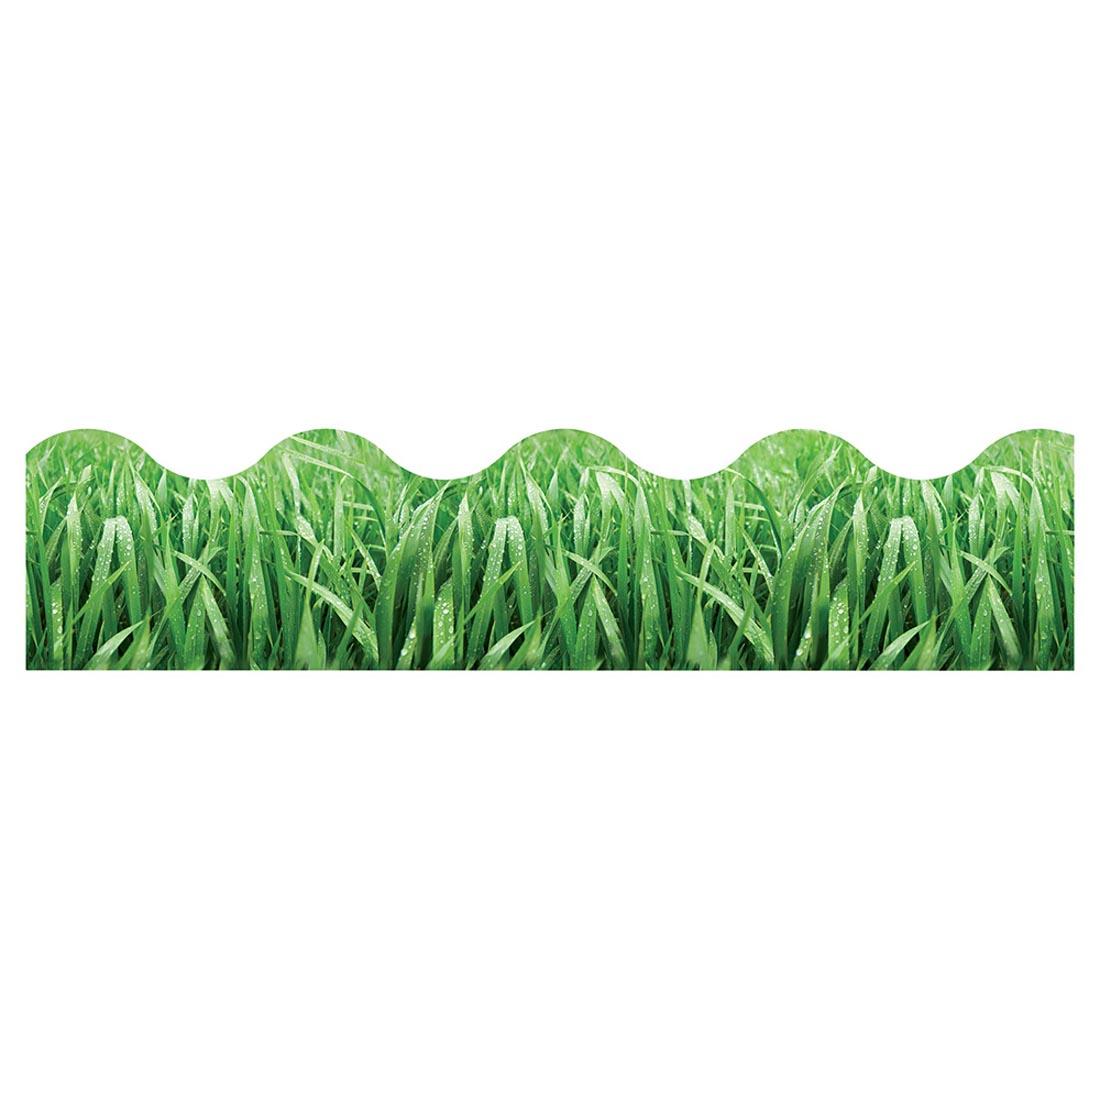 TREND Grass Terrific Trimmers